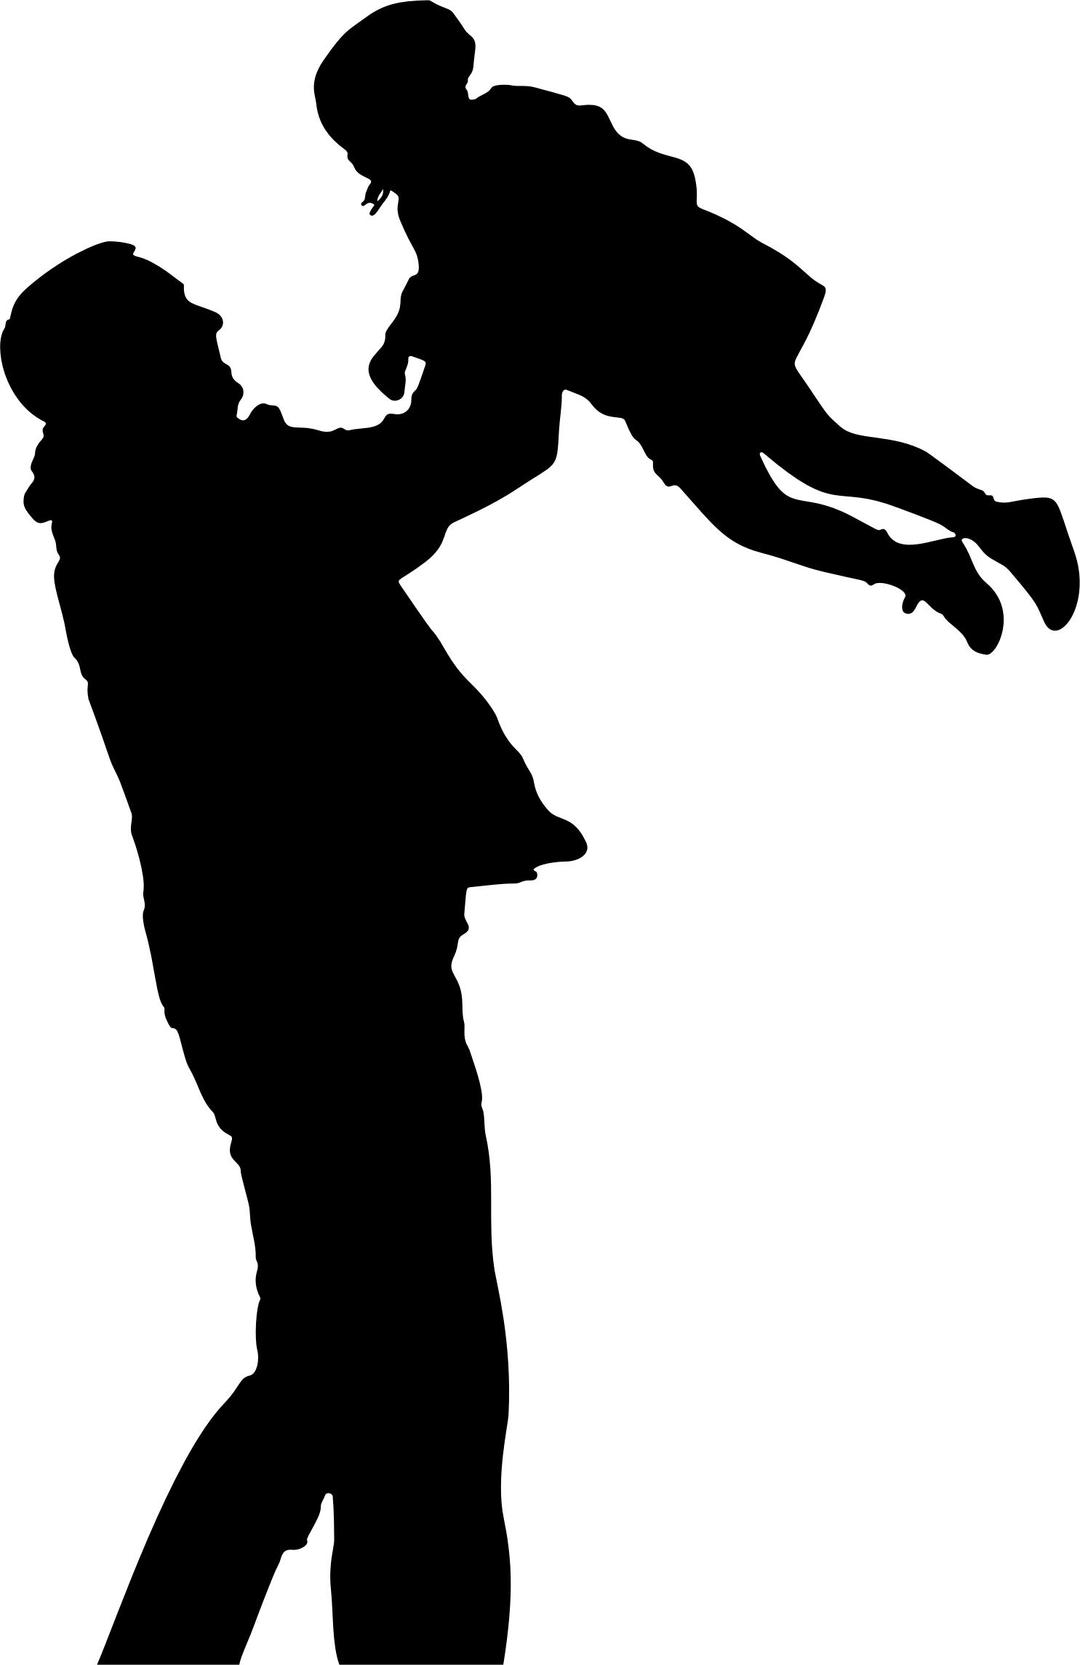 Father Playing With Daughter Silhouette png transparent